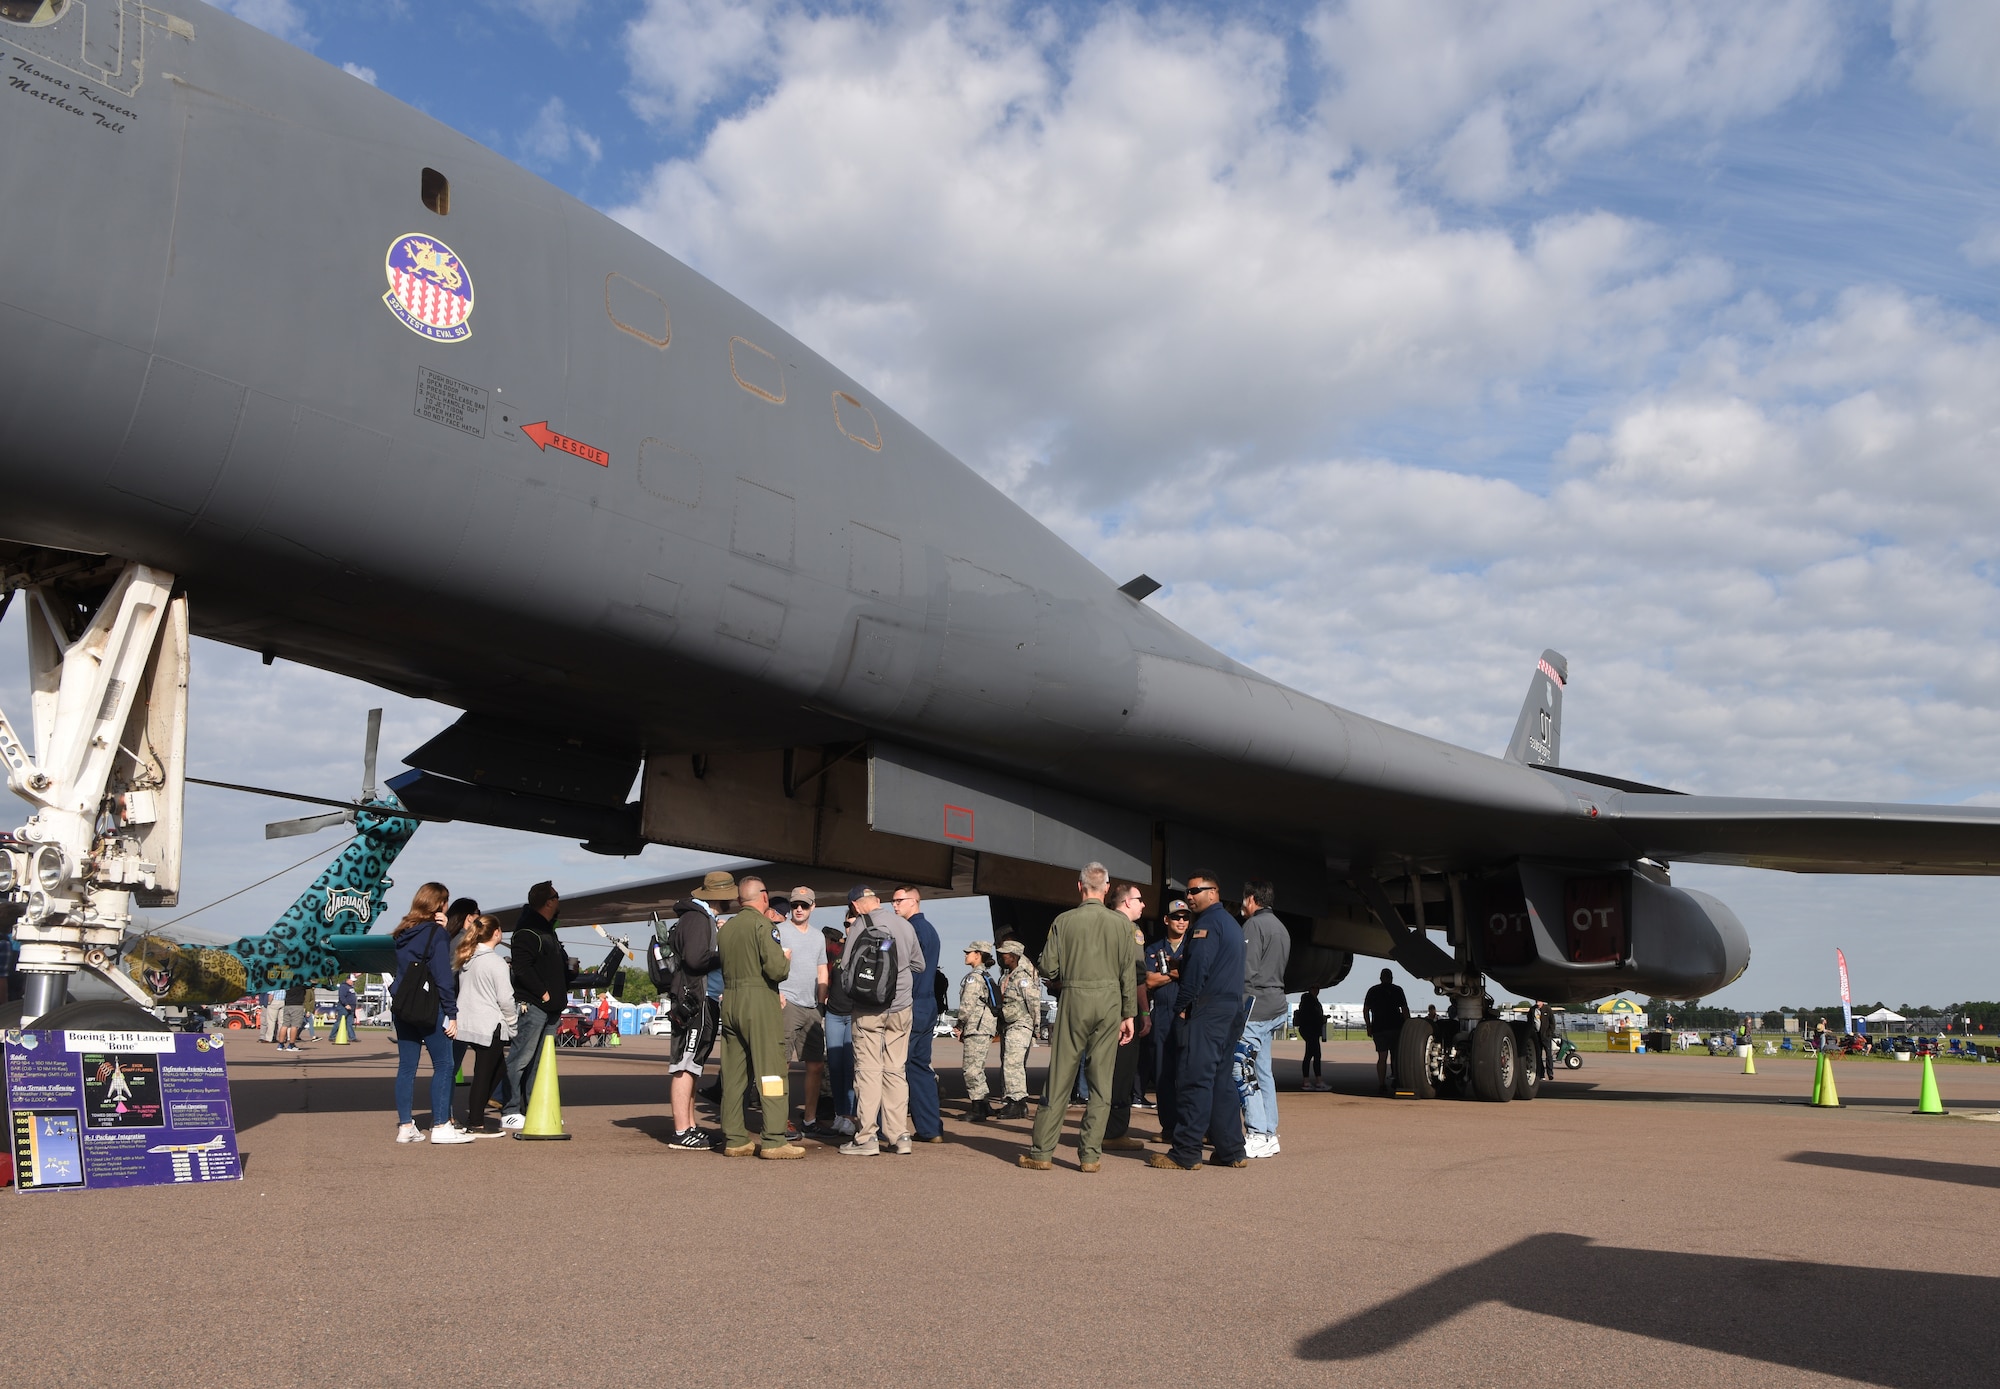 Members of the 337th Test and Evaluation Squadron speak to Sun ‘n Fun Aerospace Expo attendees at the Lakeland Linder International Airport in Lakeland, Florida, April 9, 2022. The expo started in 1974 as a fly-in for sport aviation enthusiasts and now has grown to one of the largest air shows in the world. As part of its anniversary, the expo highlighted the B-1B Lancer as one of its top static displays. (U.S. Air Force photo by Staff Sgt. Holly Cook)